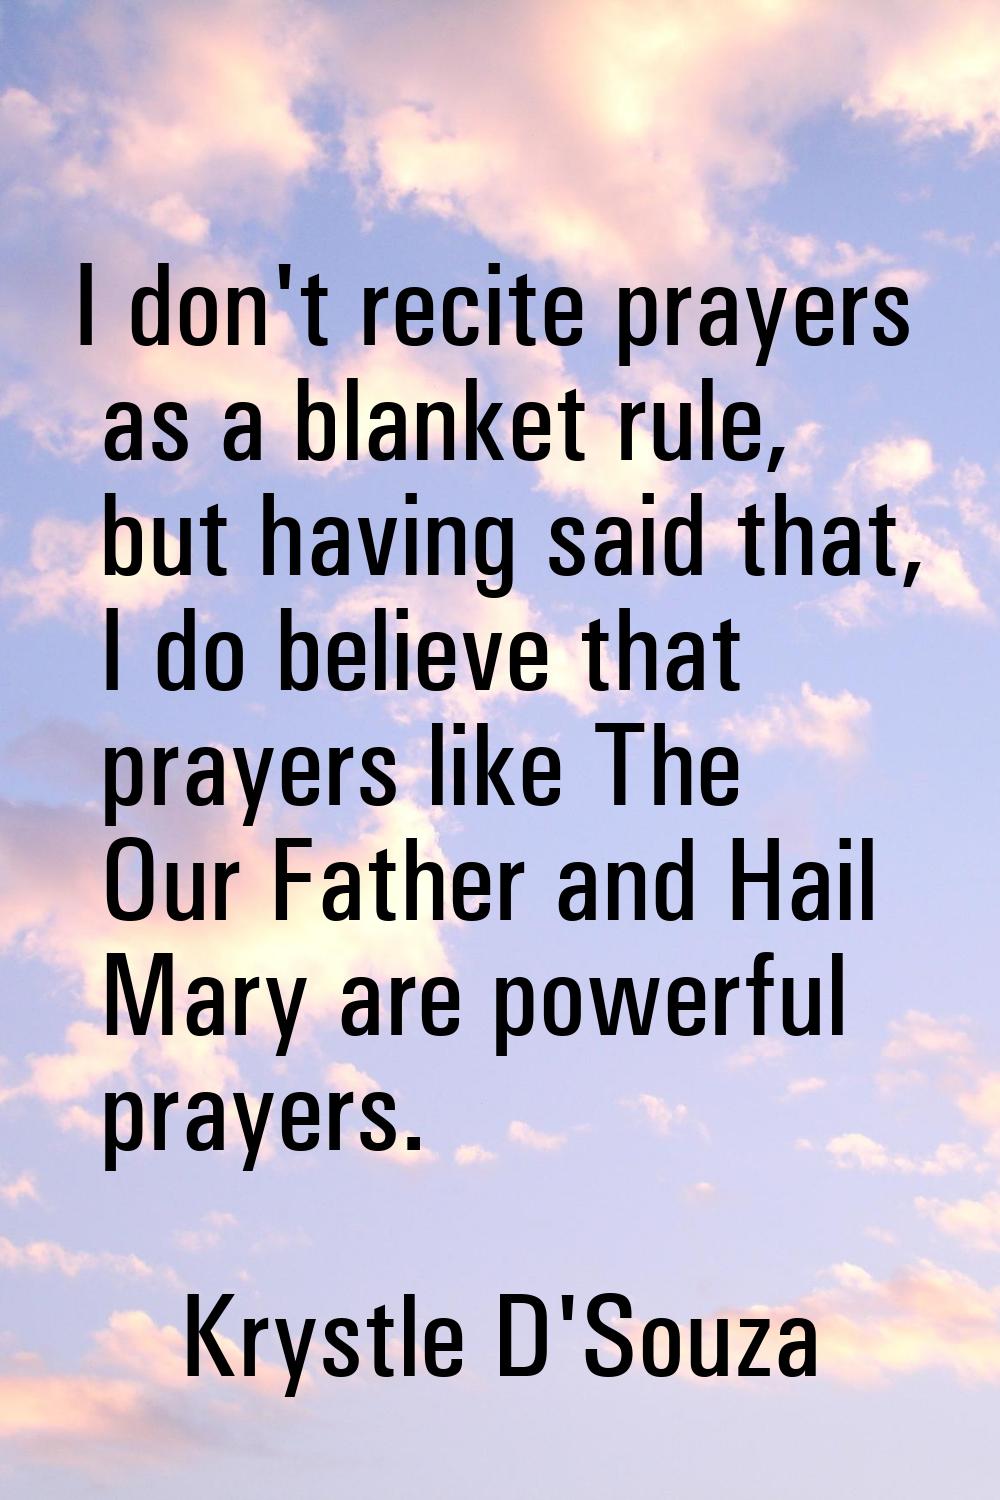 I don't recite prayers as a blanket rule, but having said that, I do believe that prayers like The 